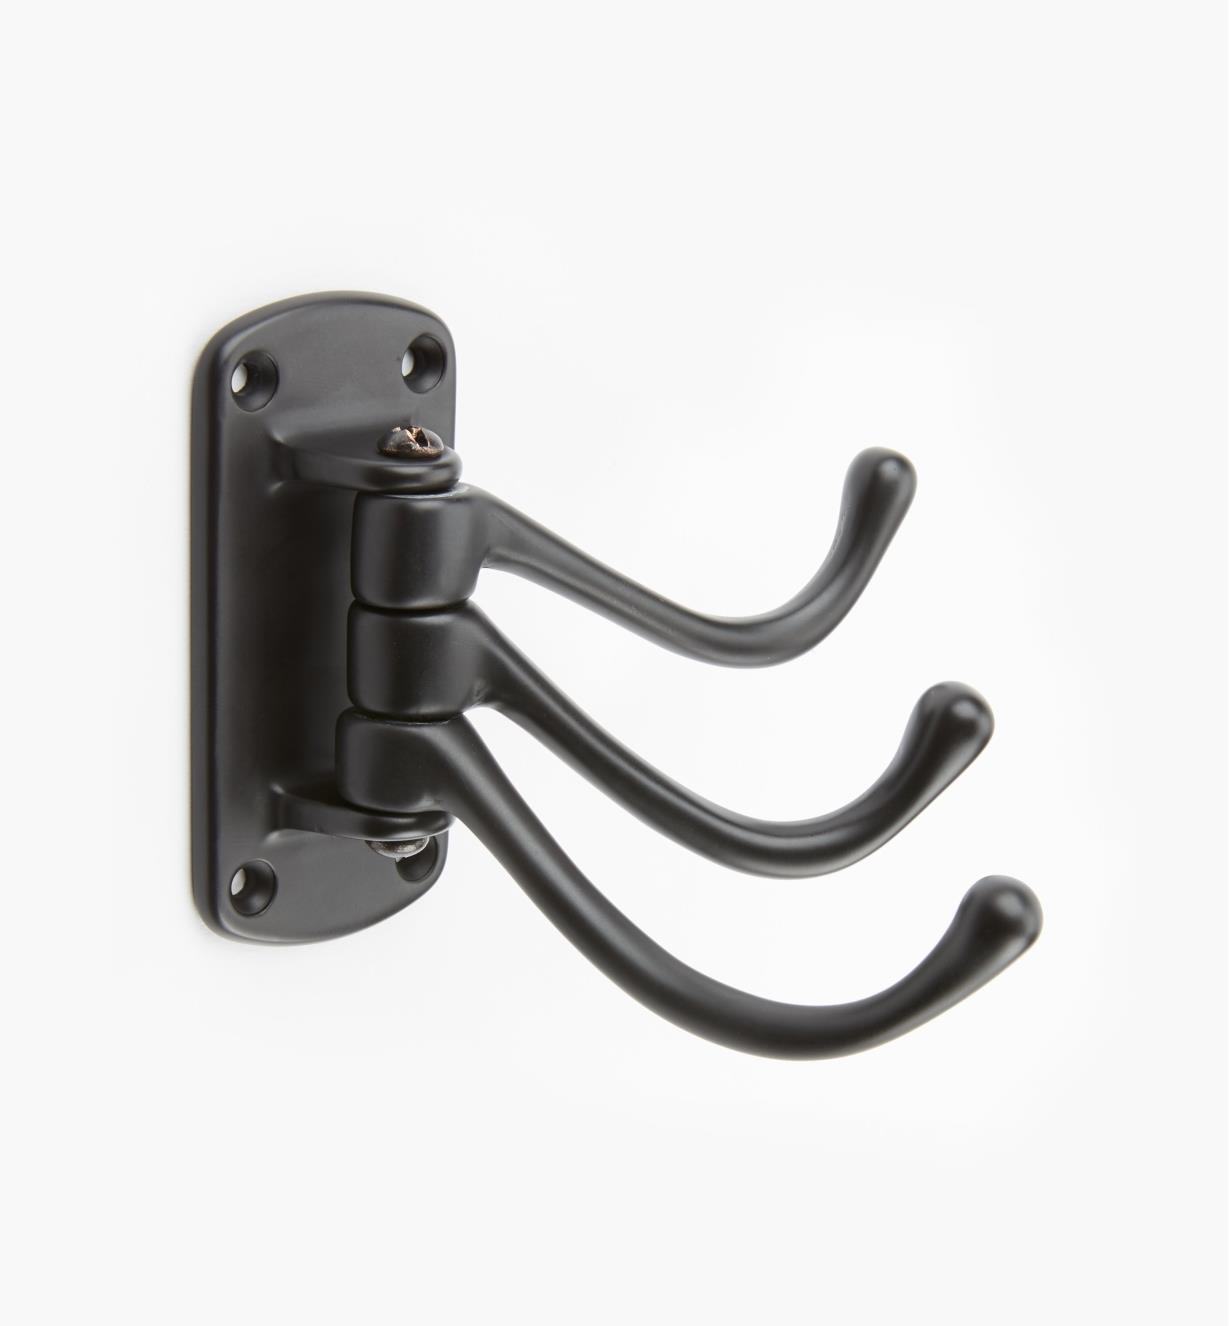 00W8621 - Small Oil-Rubbed Bronze Hook